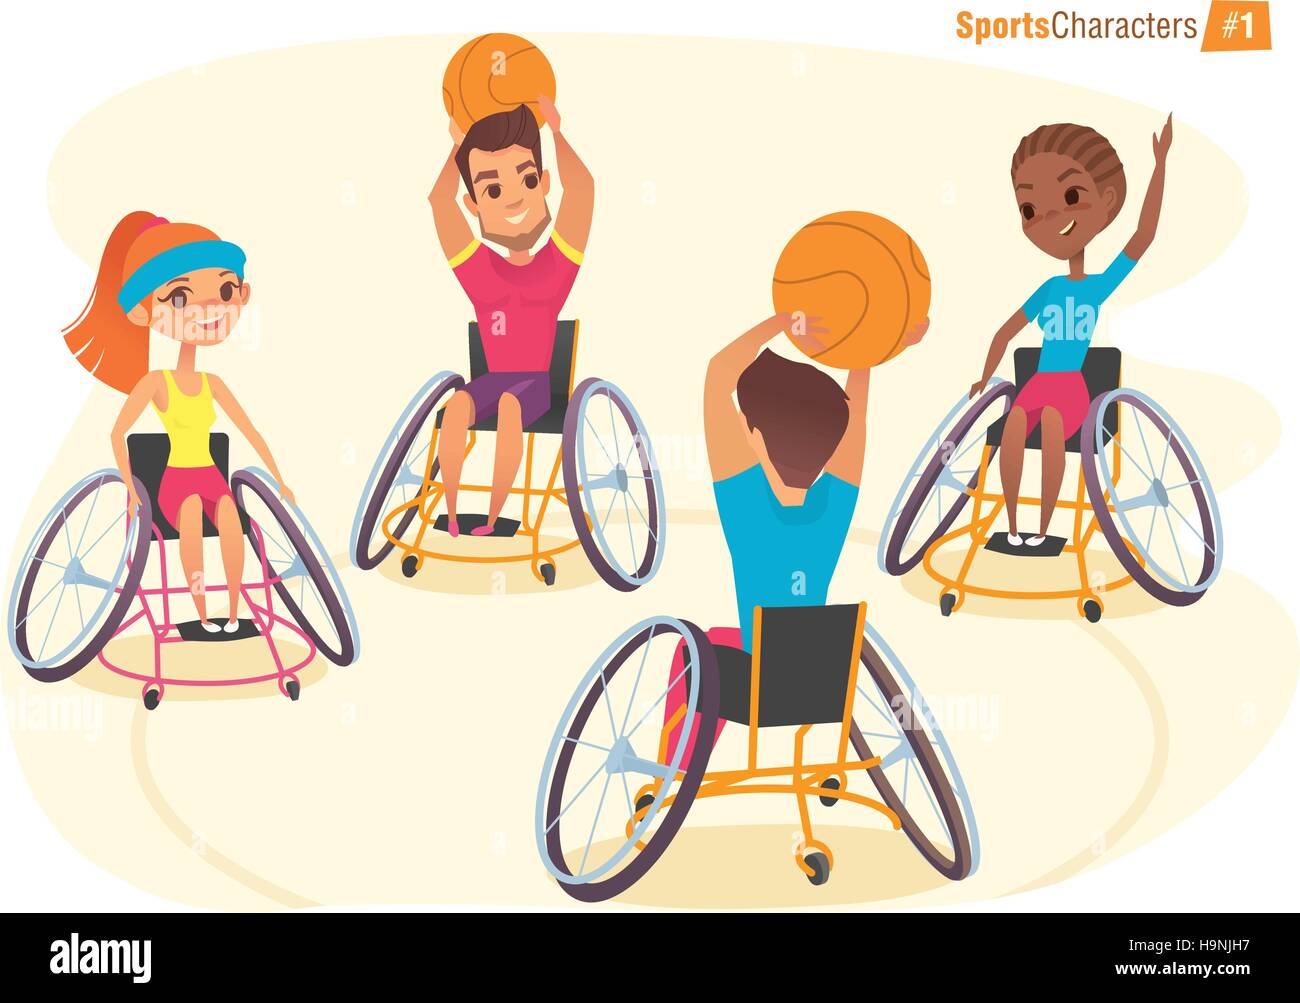 Handisport characters. Boys and girls in wheelchairs playing ball Handicap First-person view. Medical rehabilitation Illustration. Stock Vector